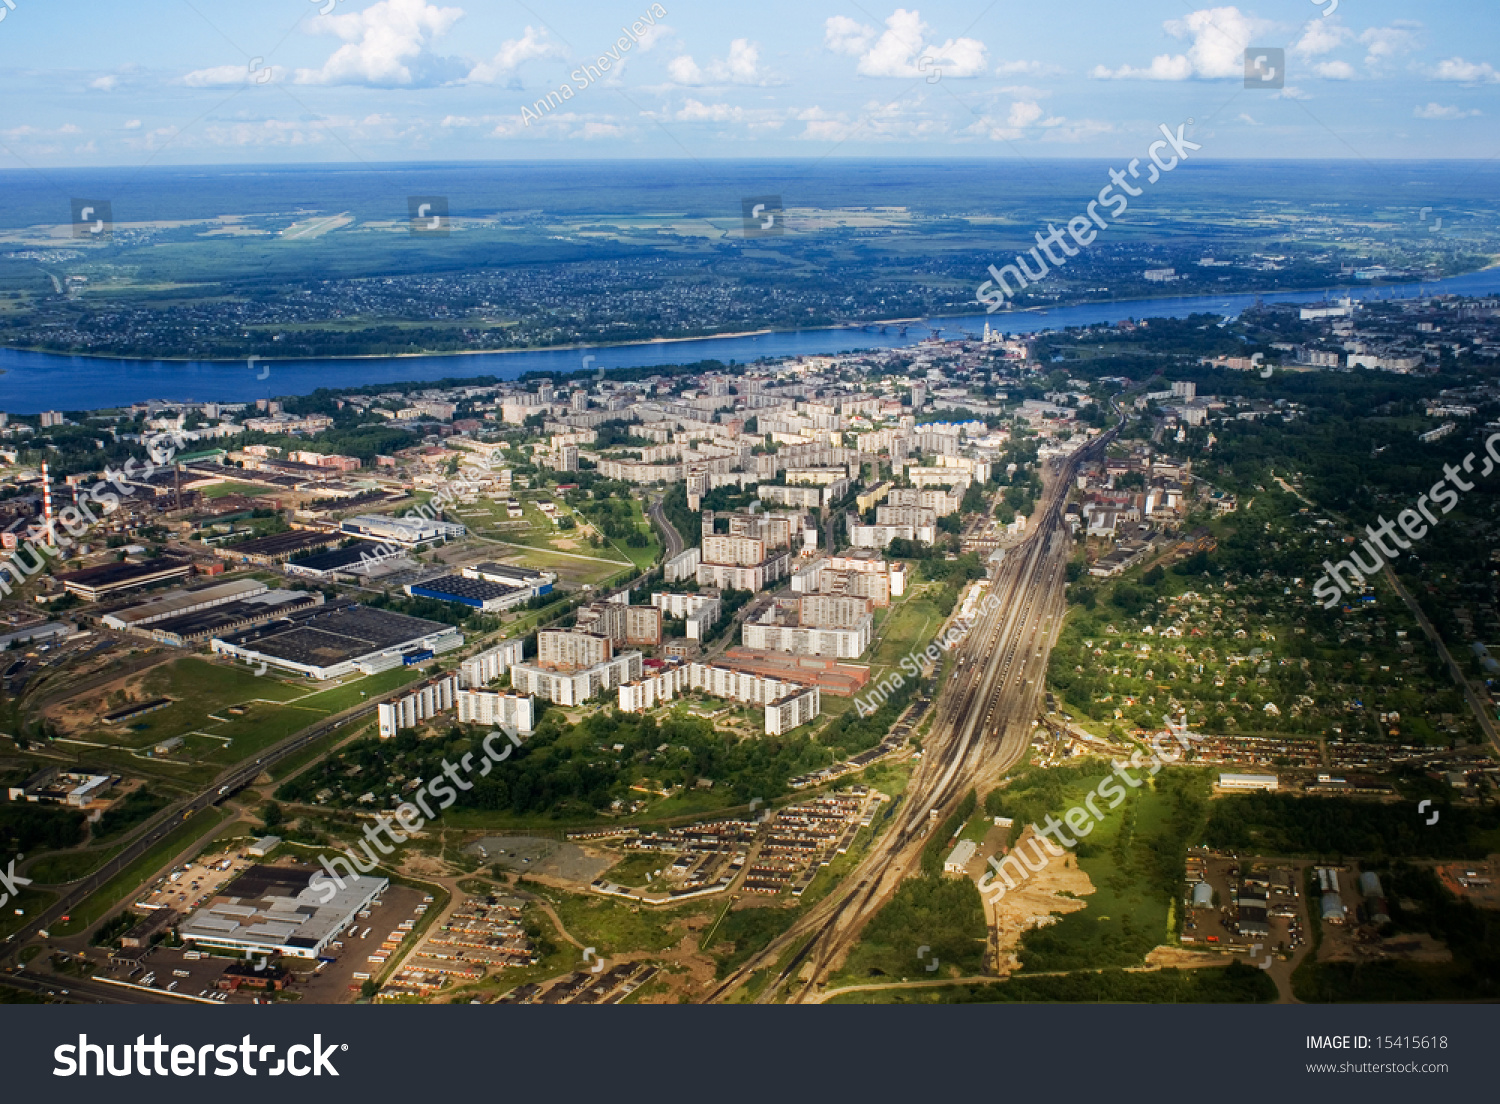 Aerial View Of Russia Town Stock Photo 15415618 : Shutterstock